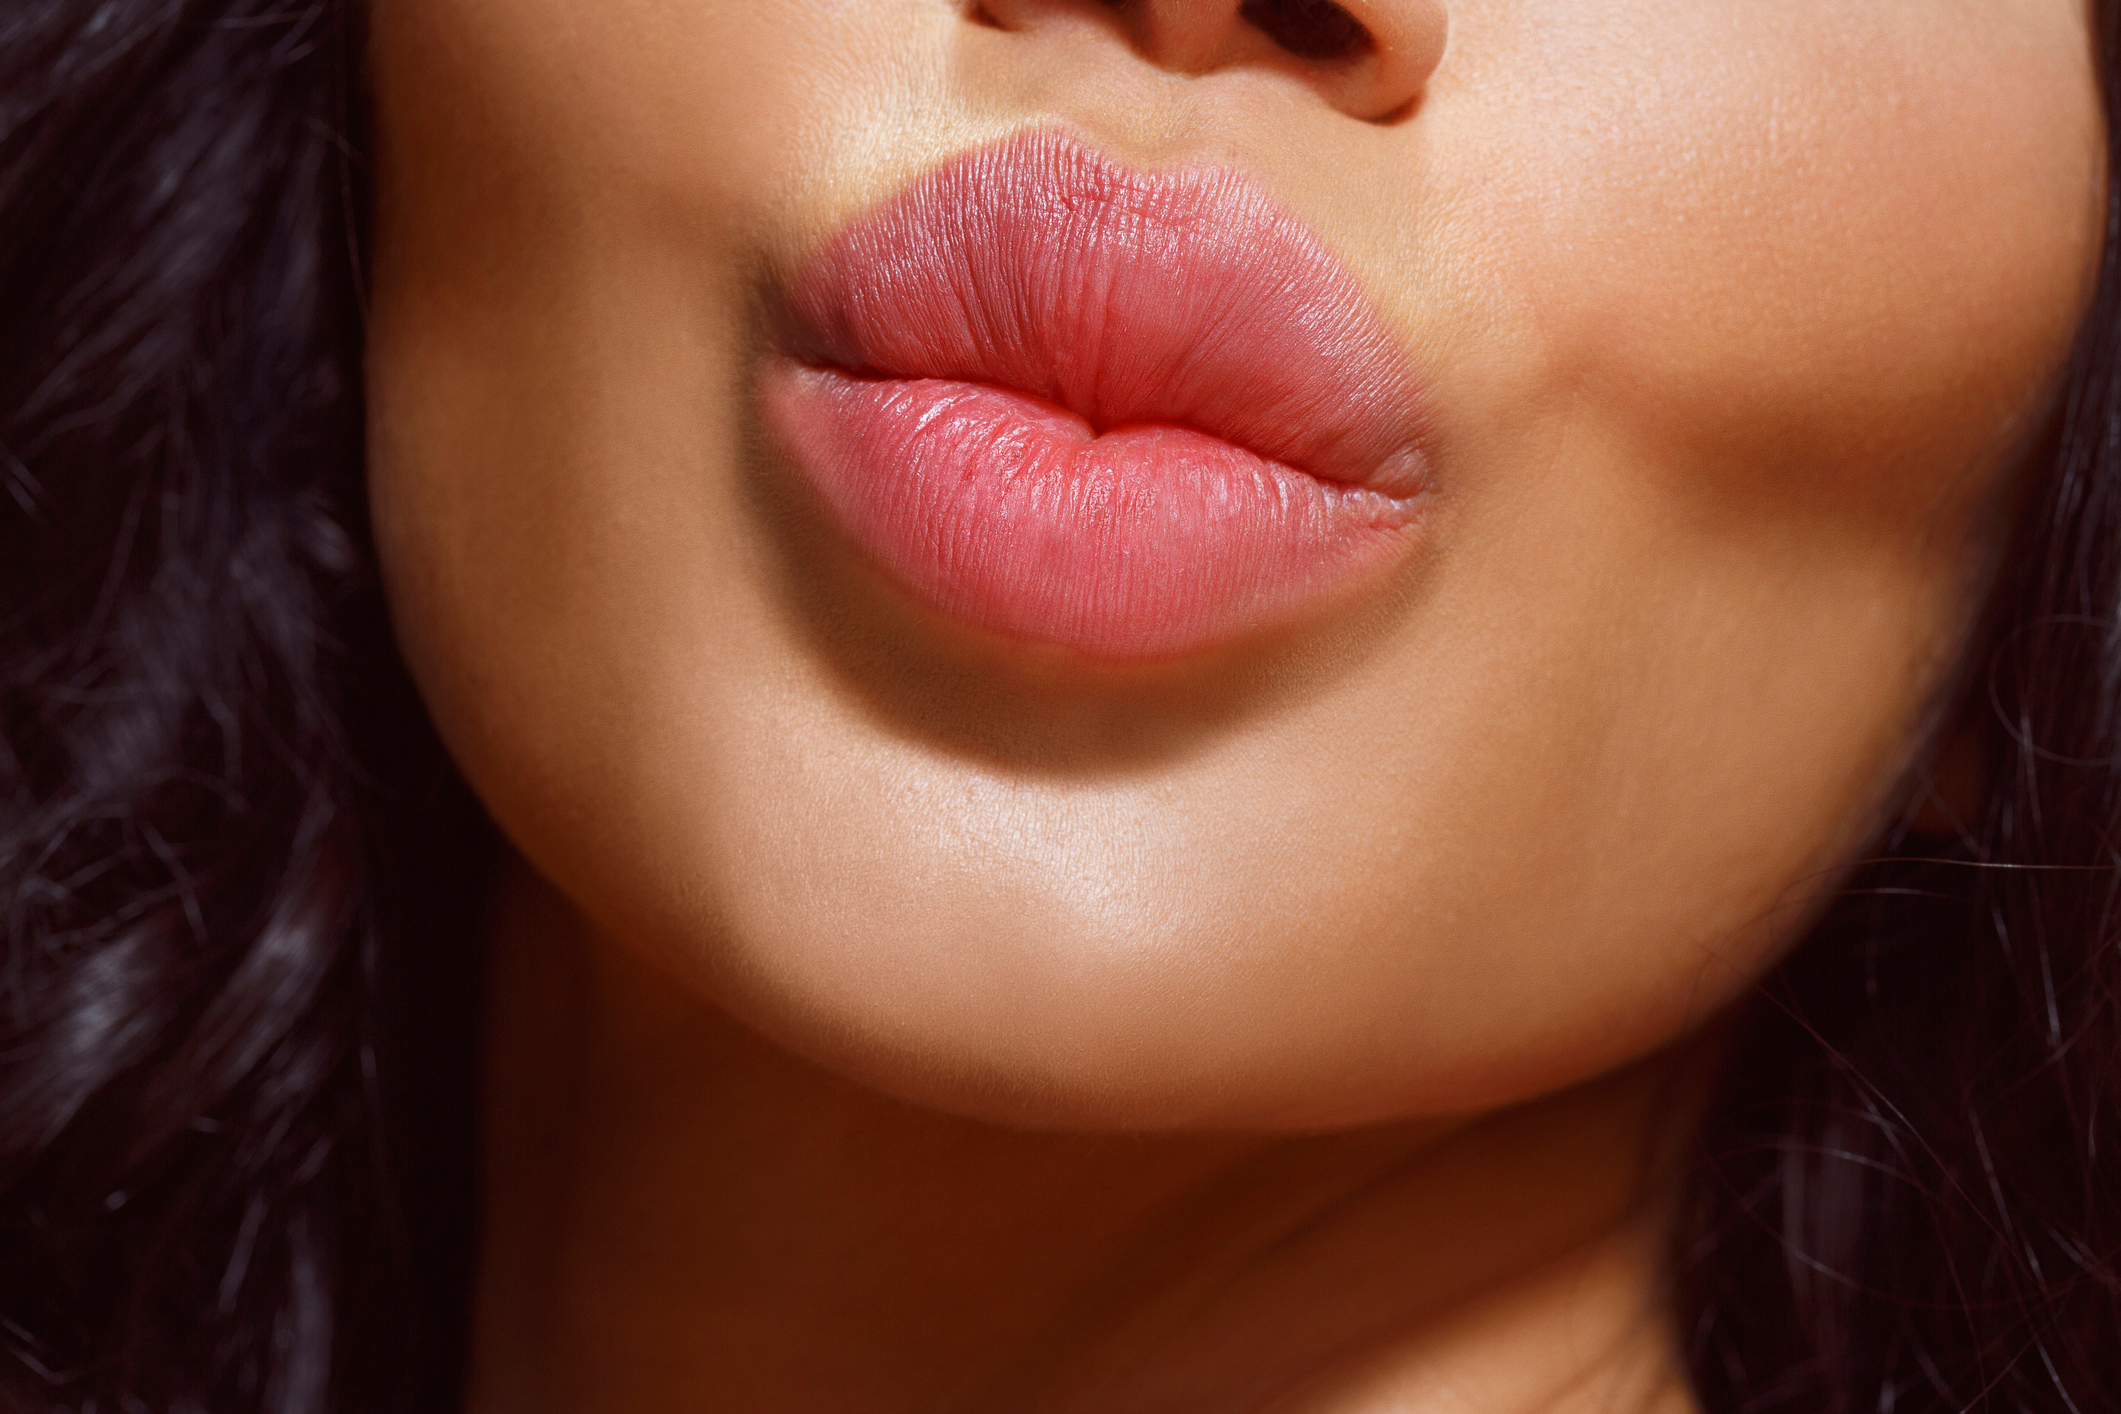 15 Best Lip Balms for Dry, Chapped Lips 2021 - Top Lip Moisturizers.